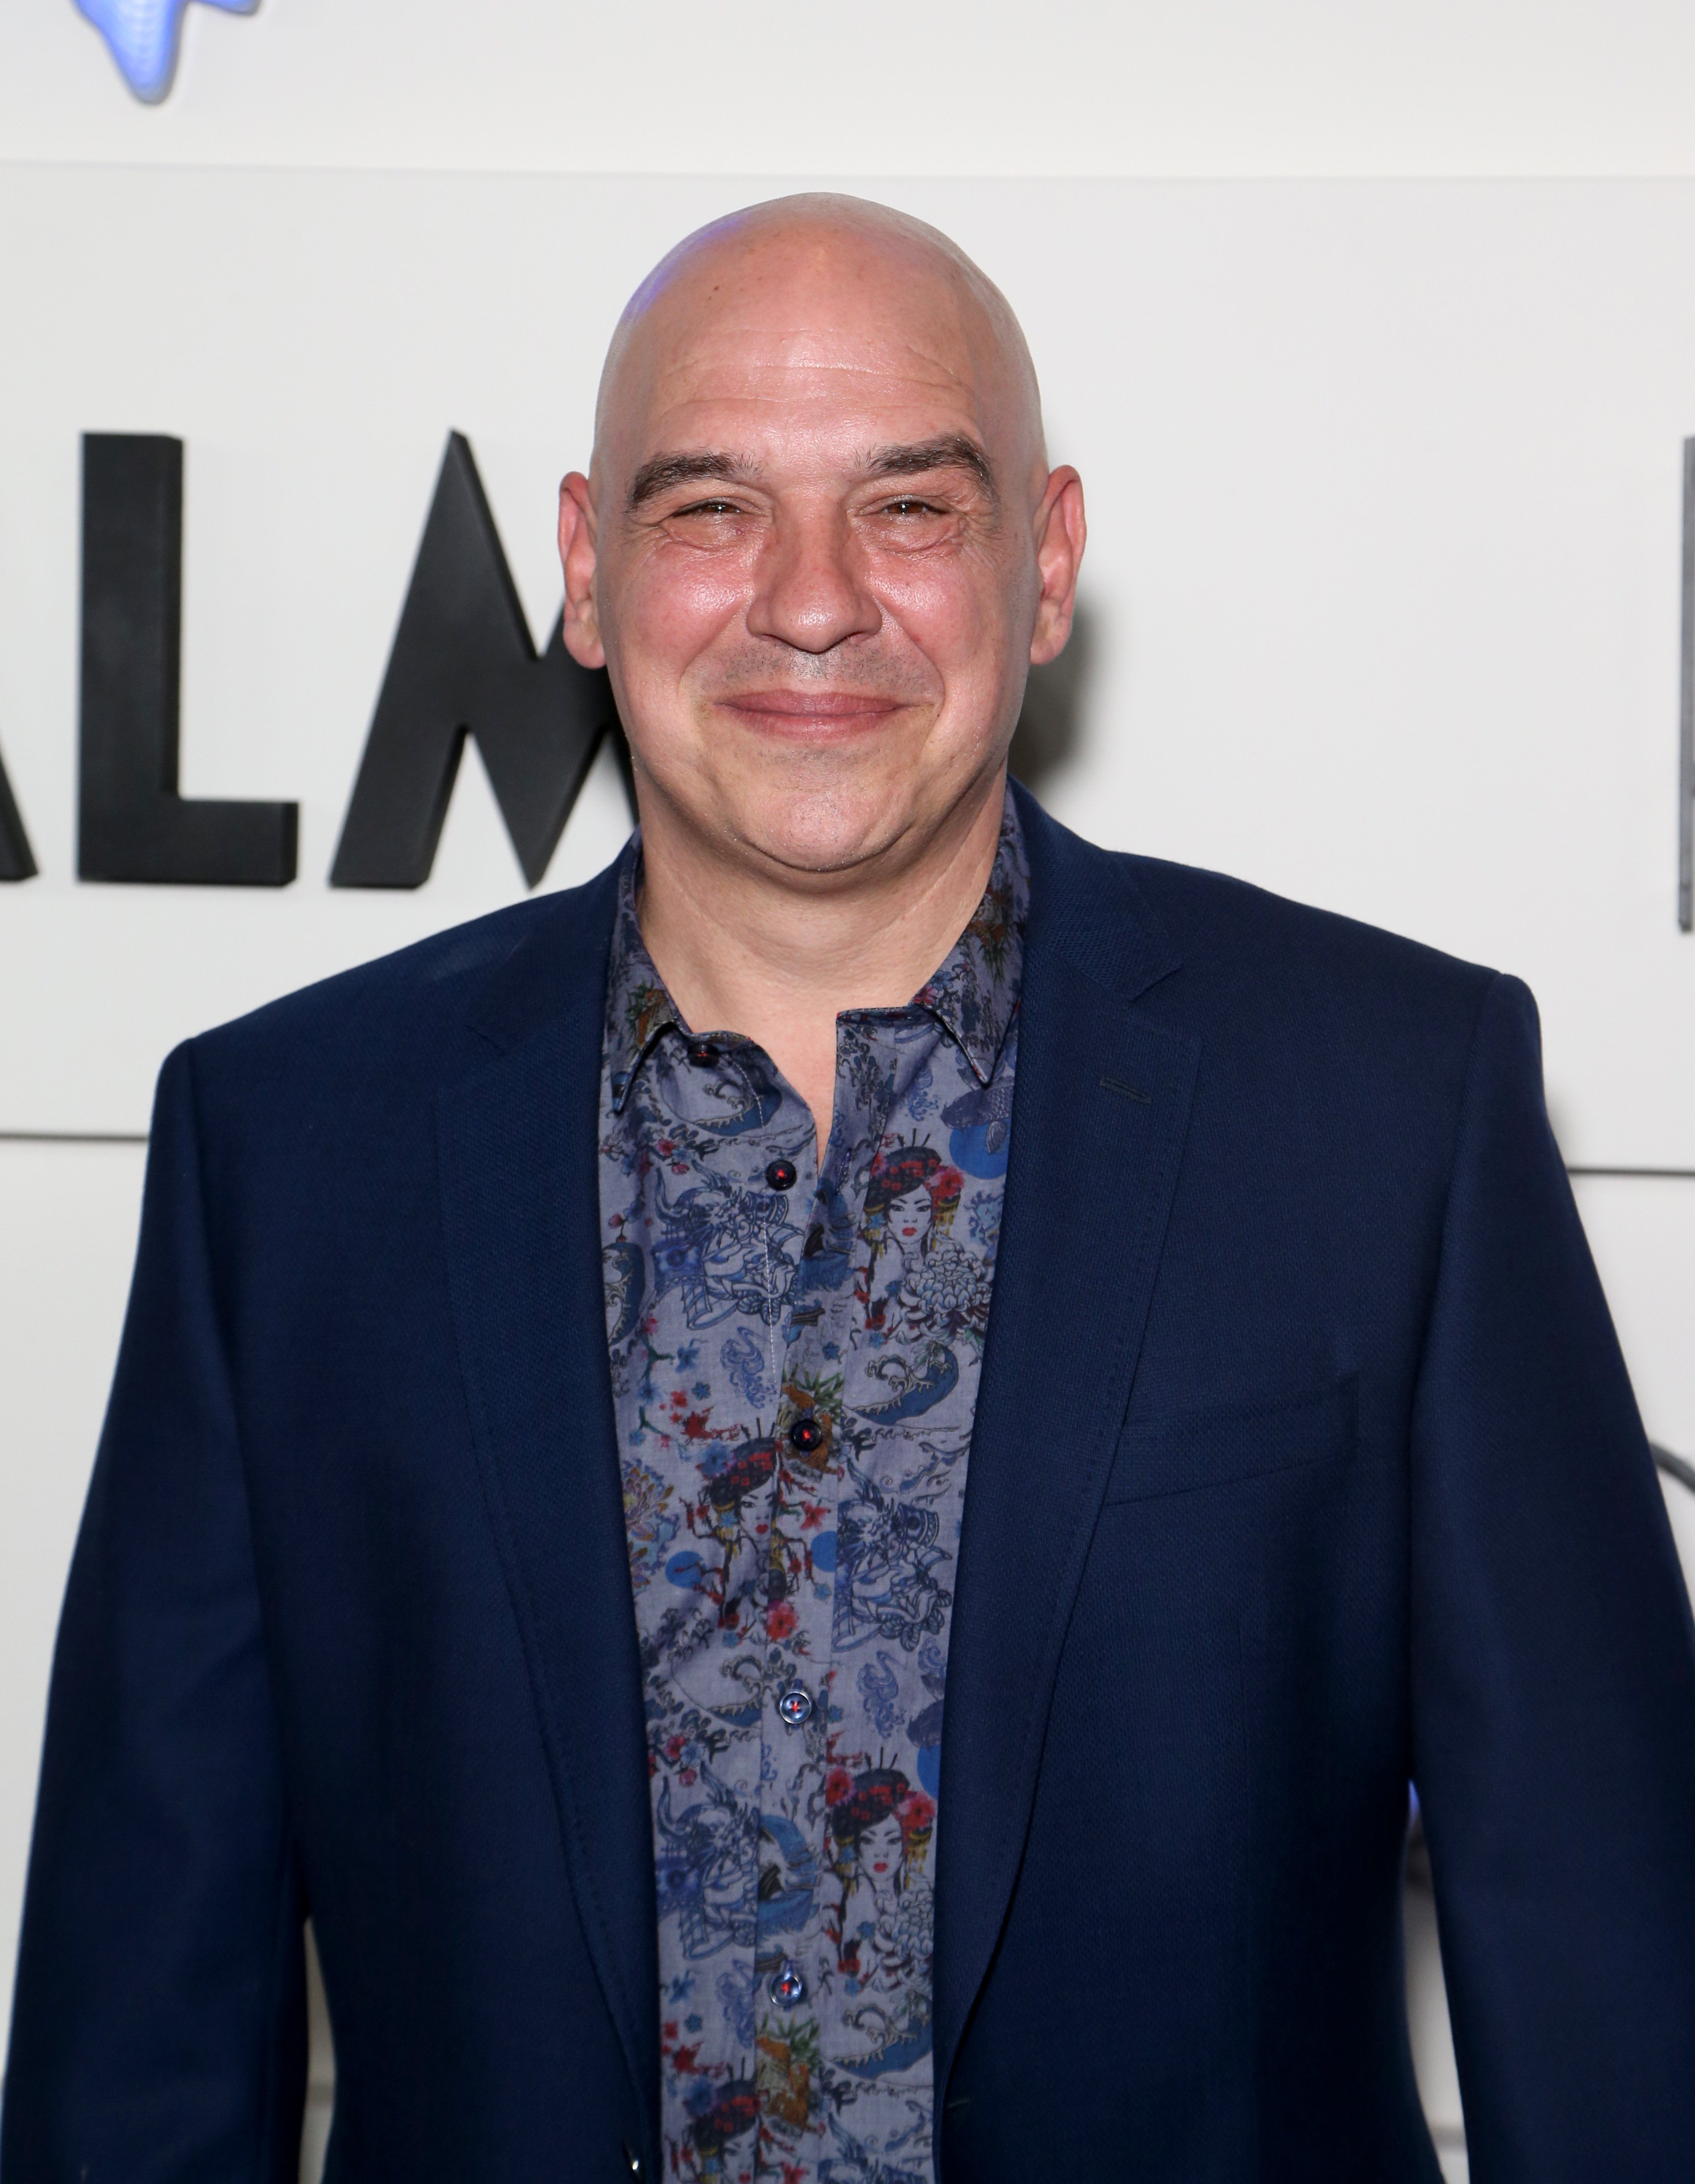 Chef Michael Symon attends the grand opening of KAOS Dayclub & Nightclub | Source: Getty Images